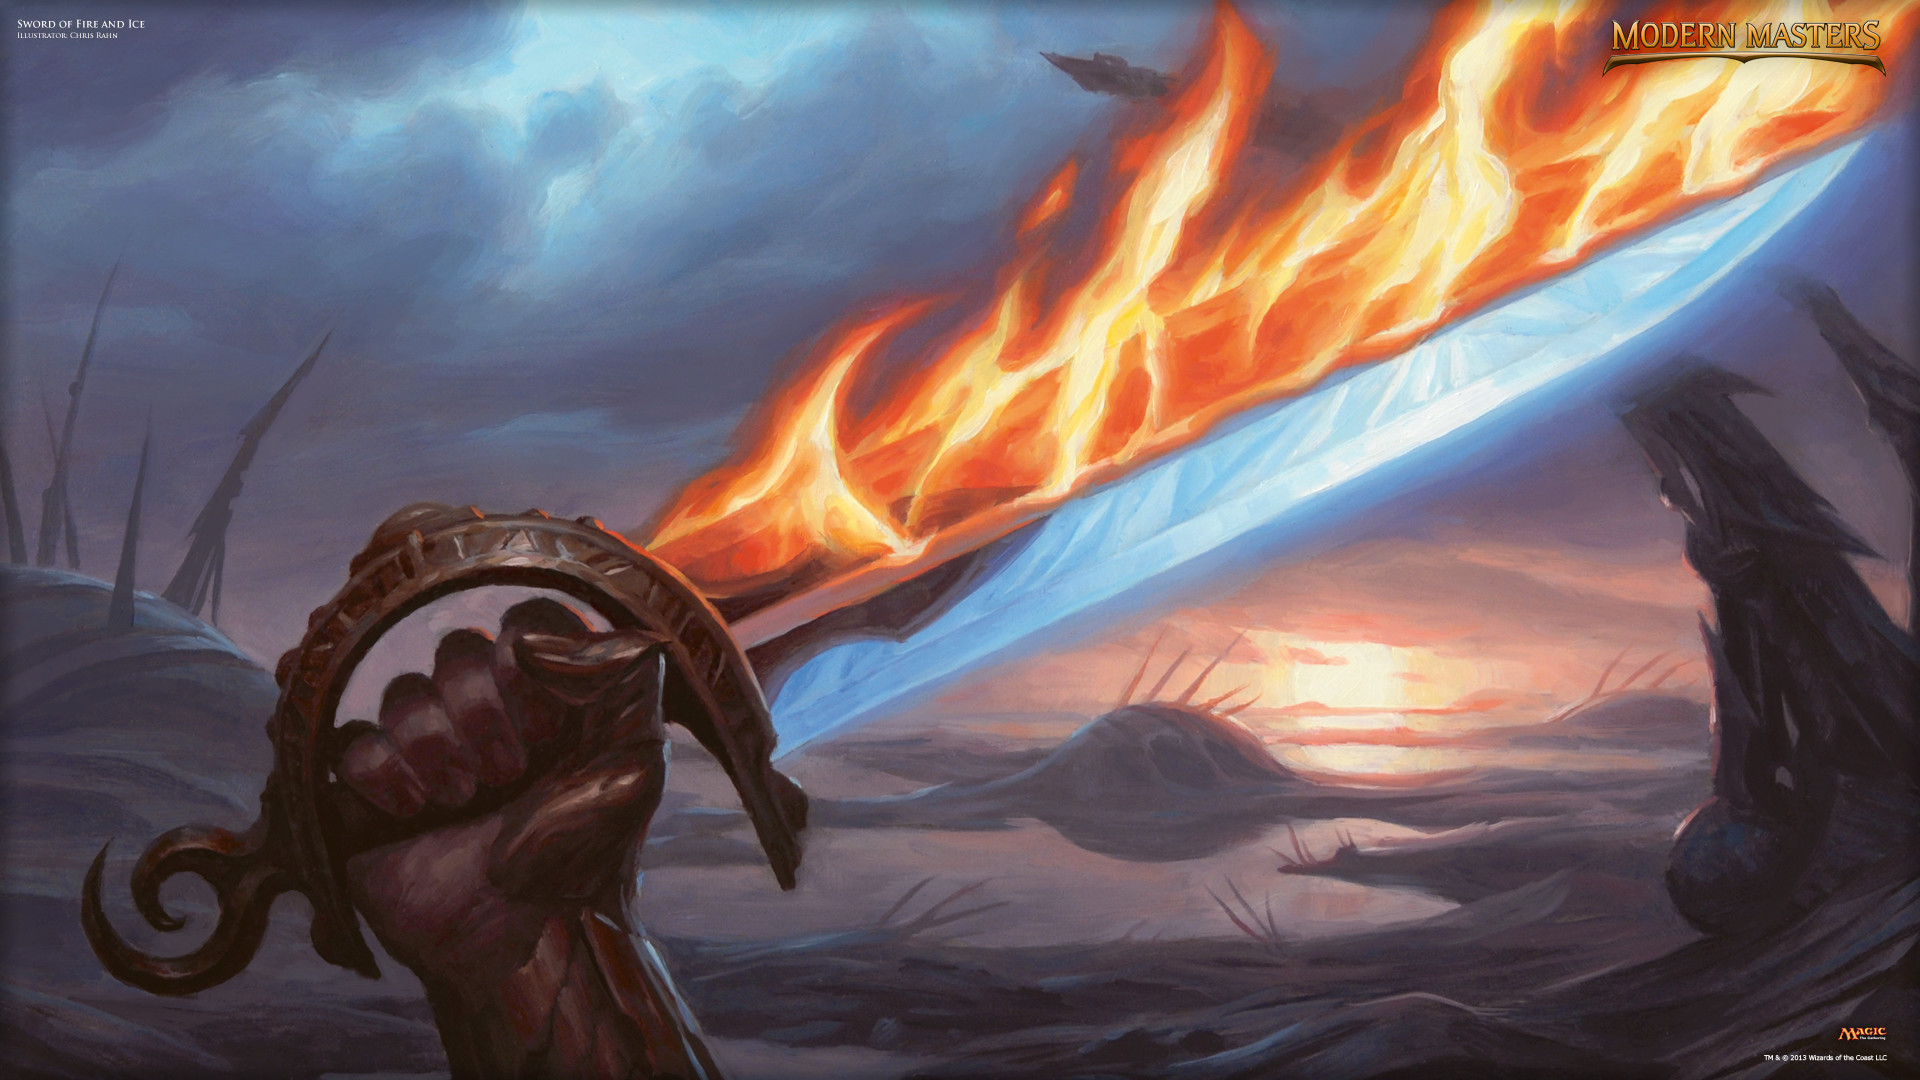 1920x1080 Wallpaper of the Week: Sword of Fire and Ice